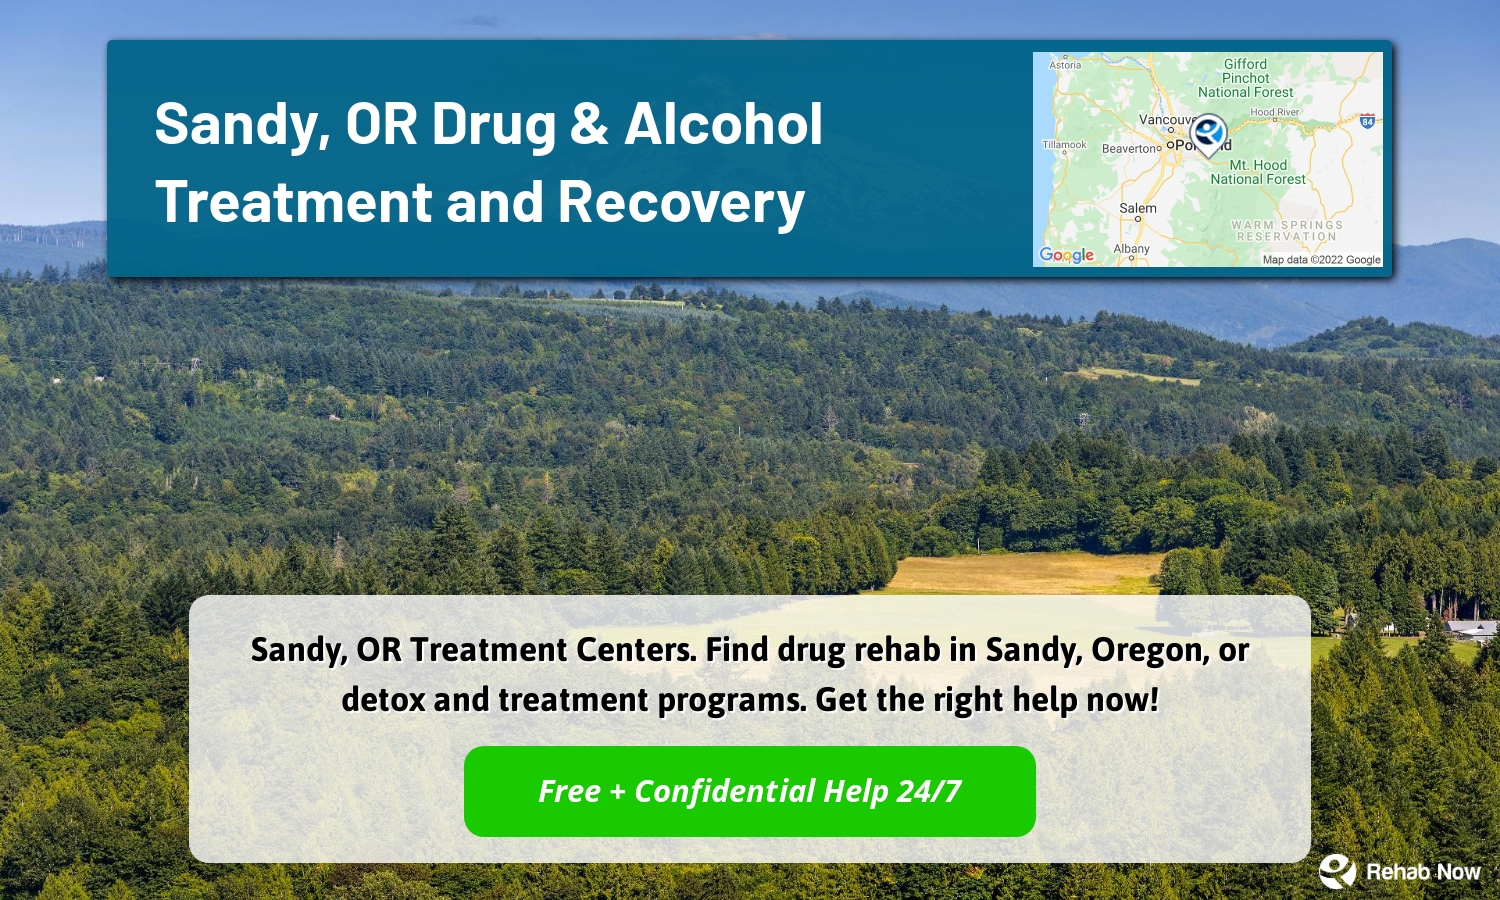 Sandy, OR Treatment Centers. Find drug rehab in Sandy, Oregon, or detox and treatment programs. Get the right help now!